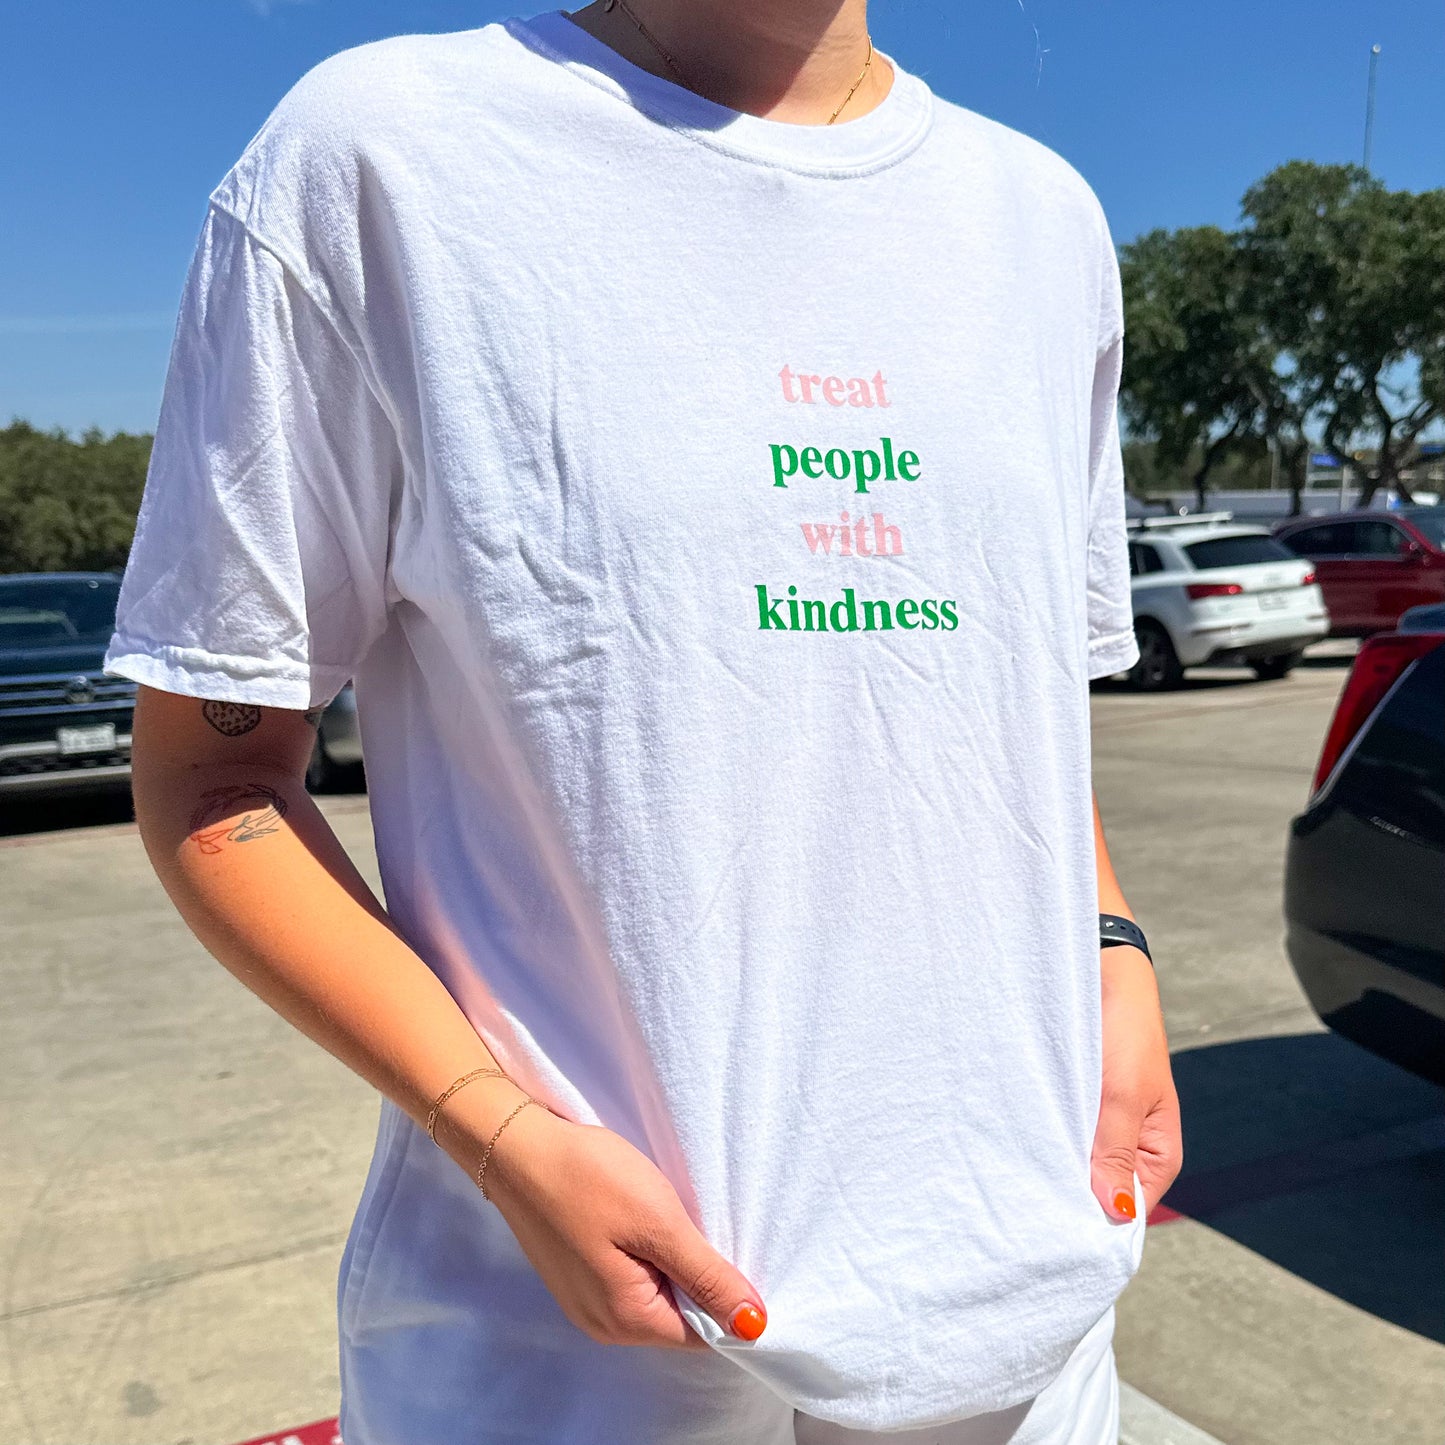 Treat people with kindness T-shirt - White